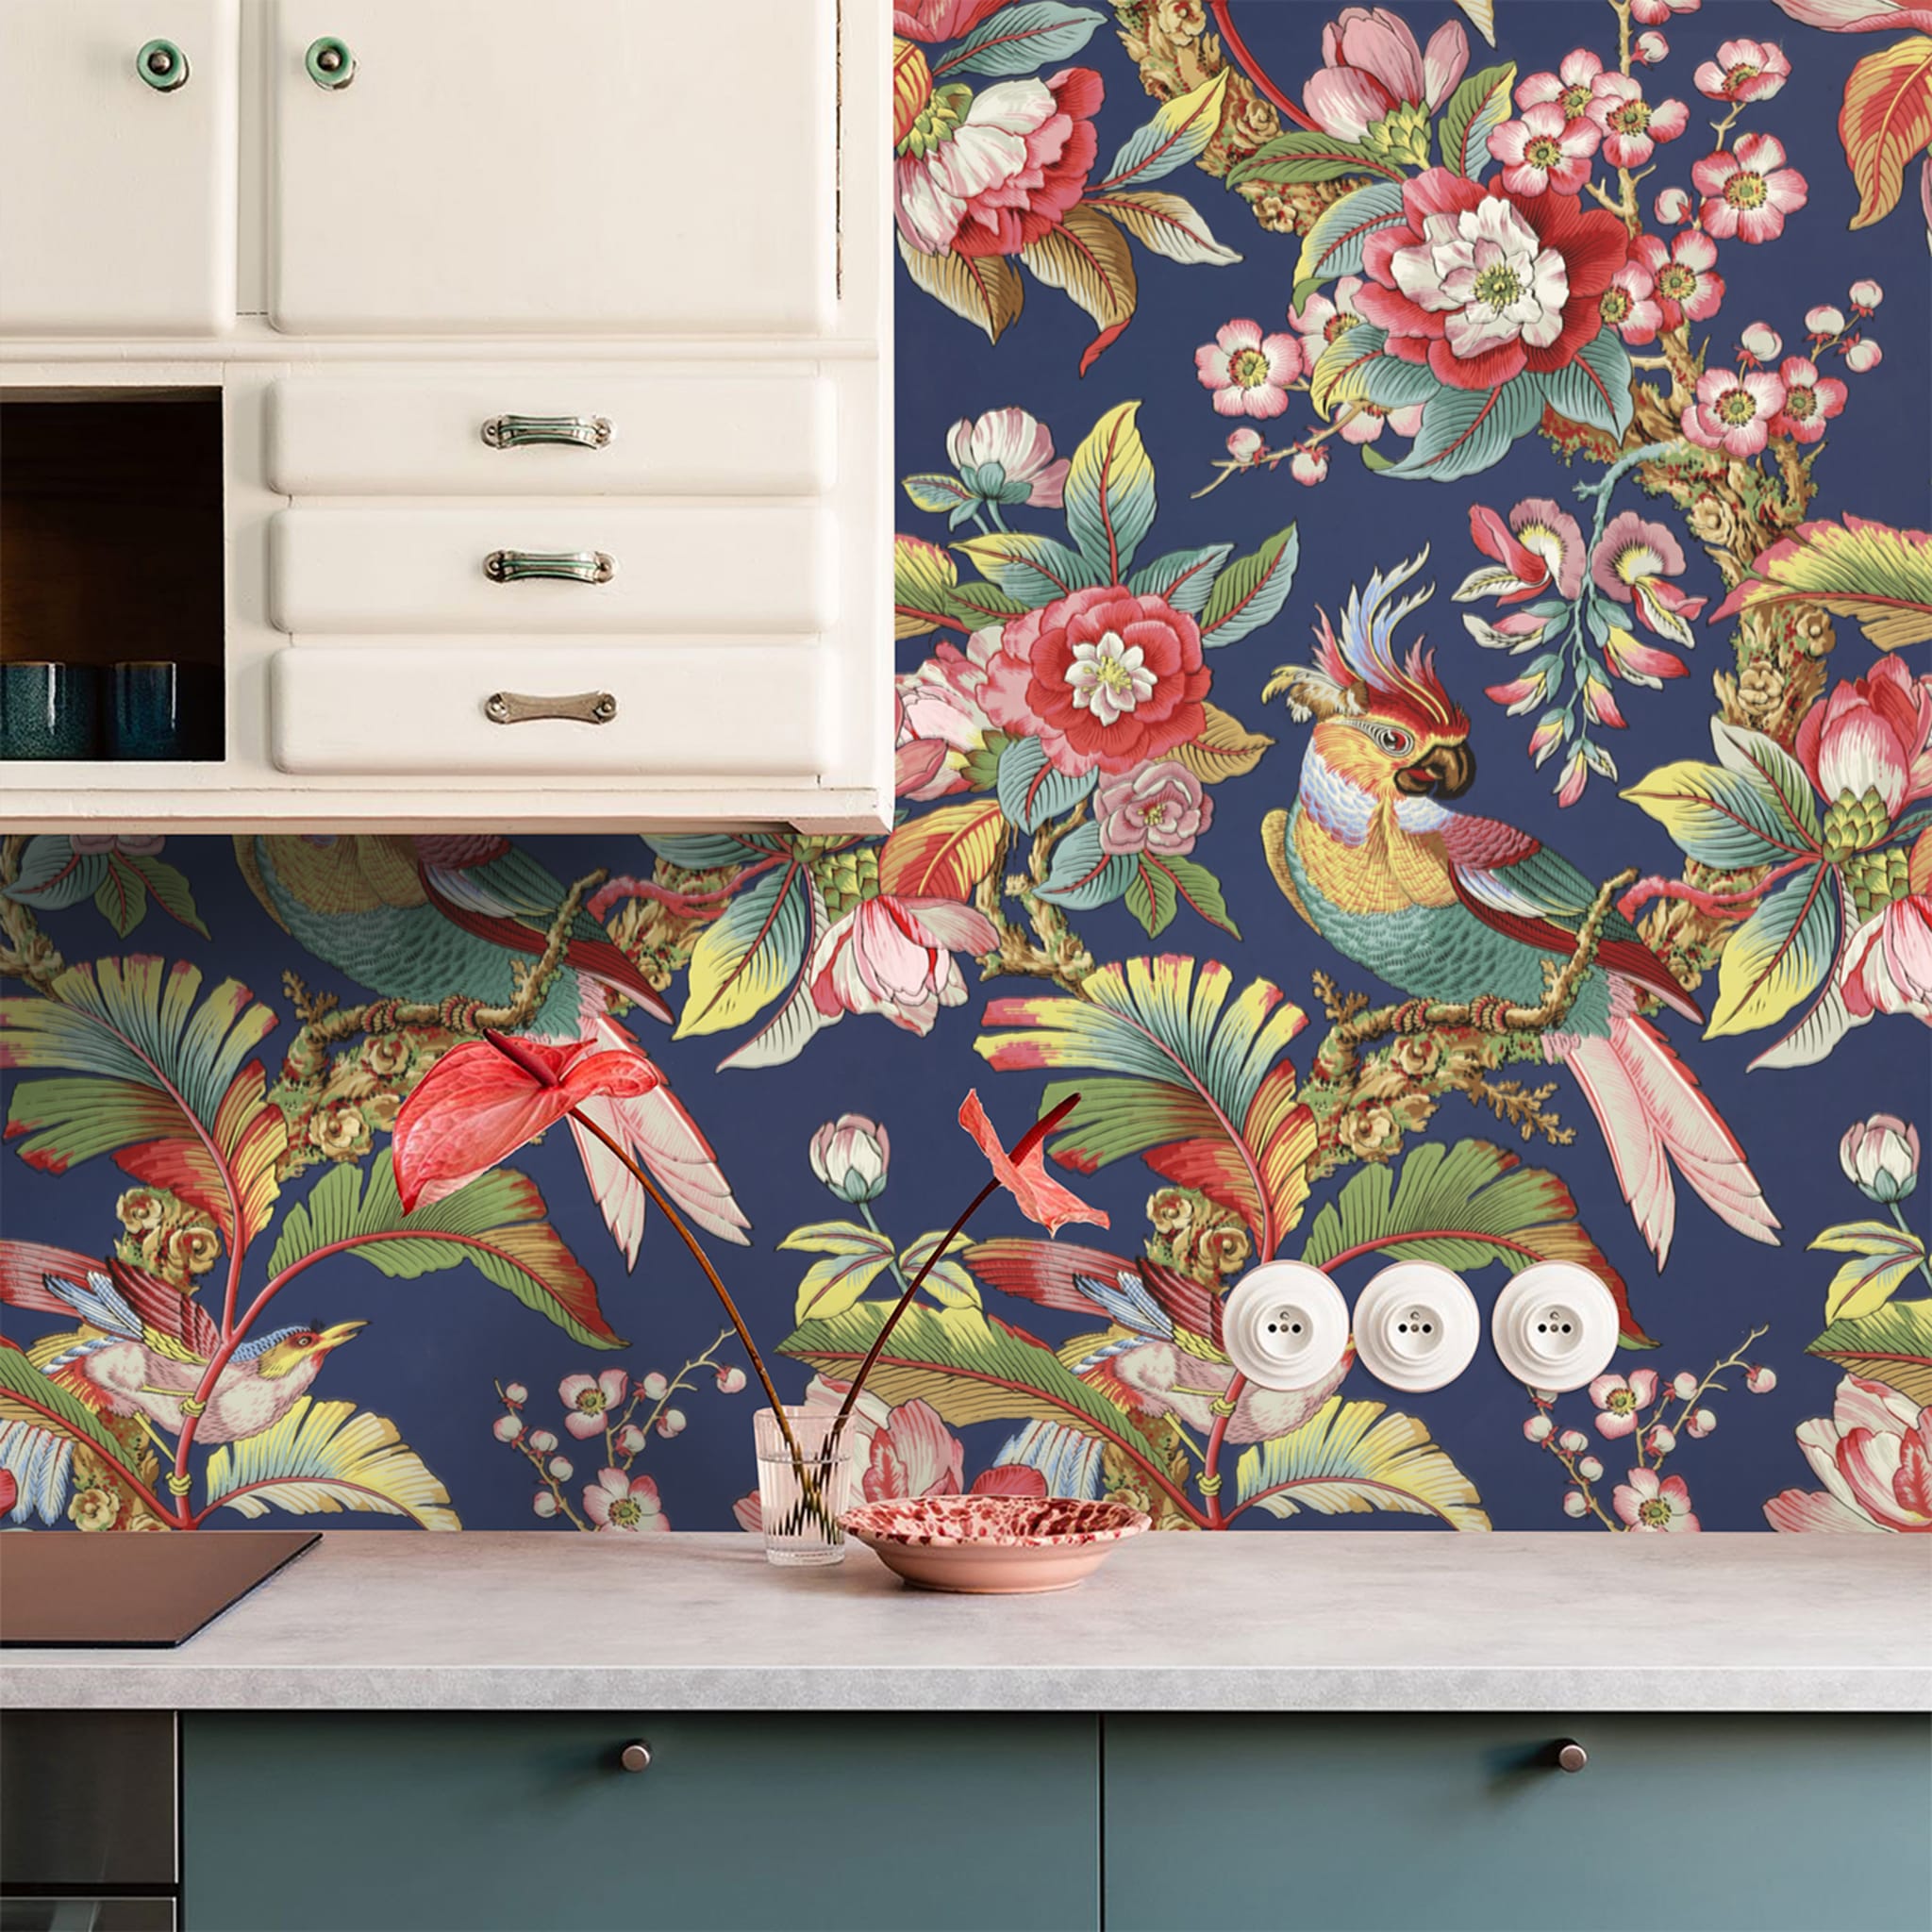 Vintage Asian Chinoiserie Wallpaper - Alternative view 2